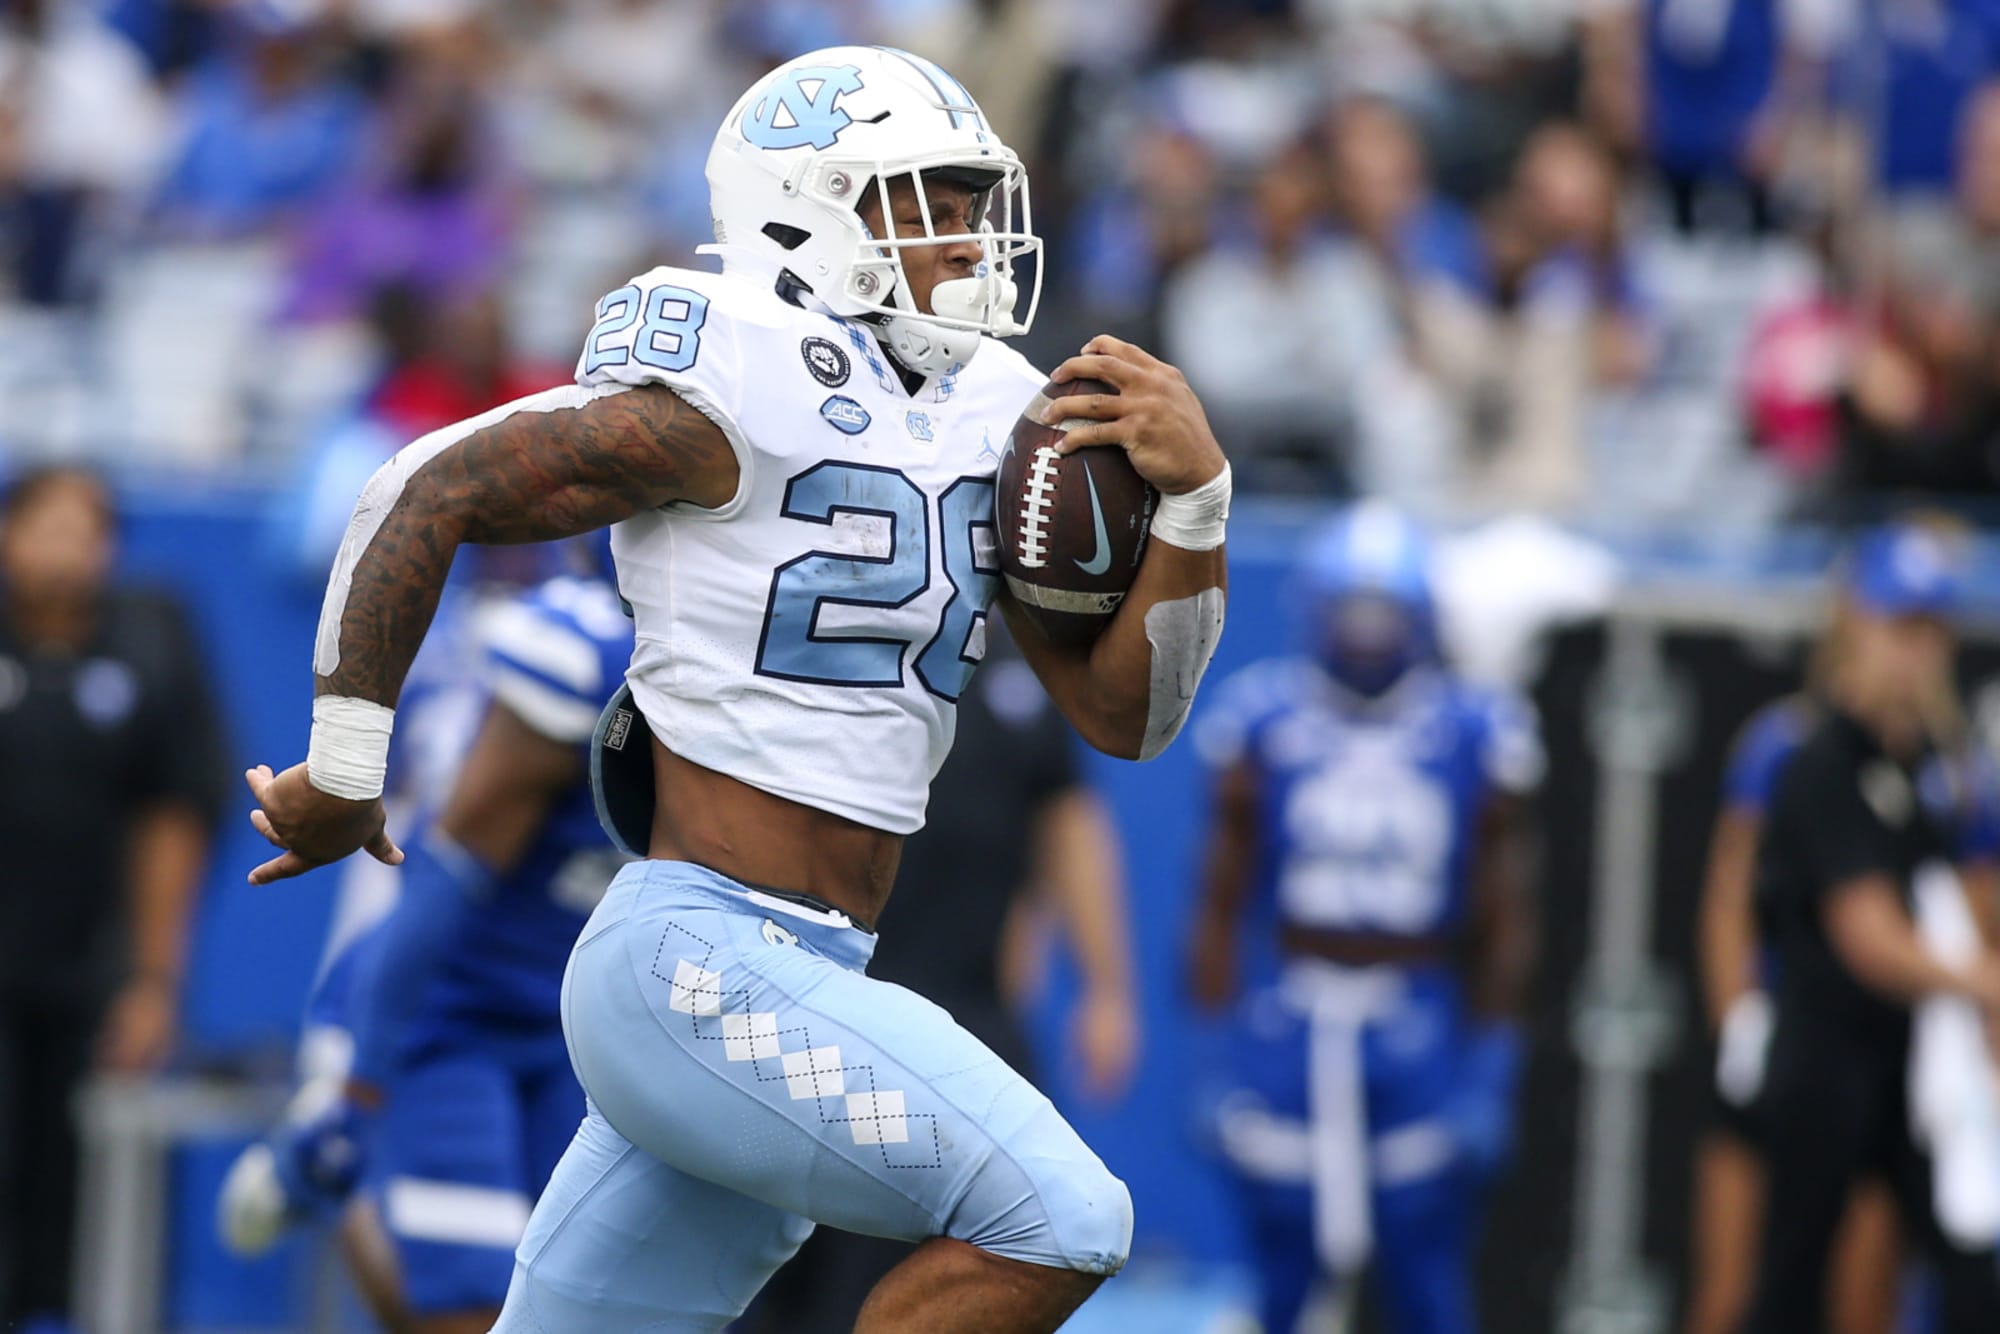 UNC Football vs. Notre Dame: Preview, info, prediction and more